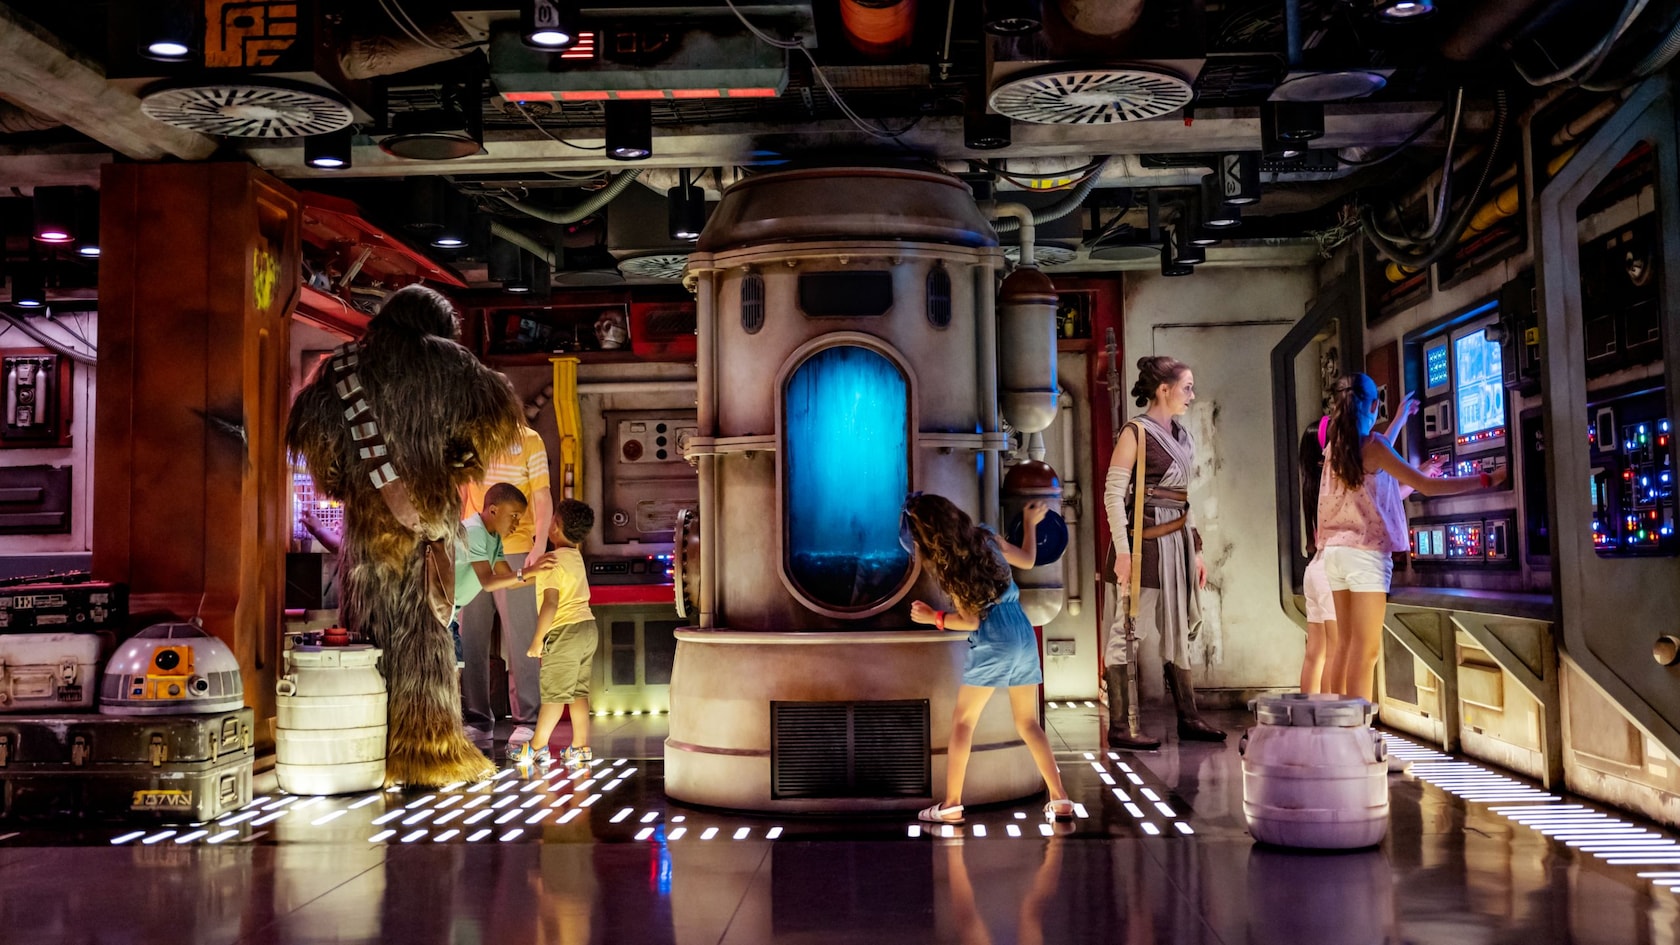 Rey and Chewbacca watch on as children explore the cargo area of a Star Wars ship